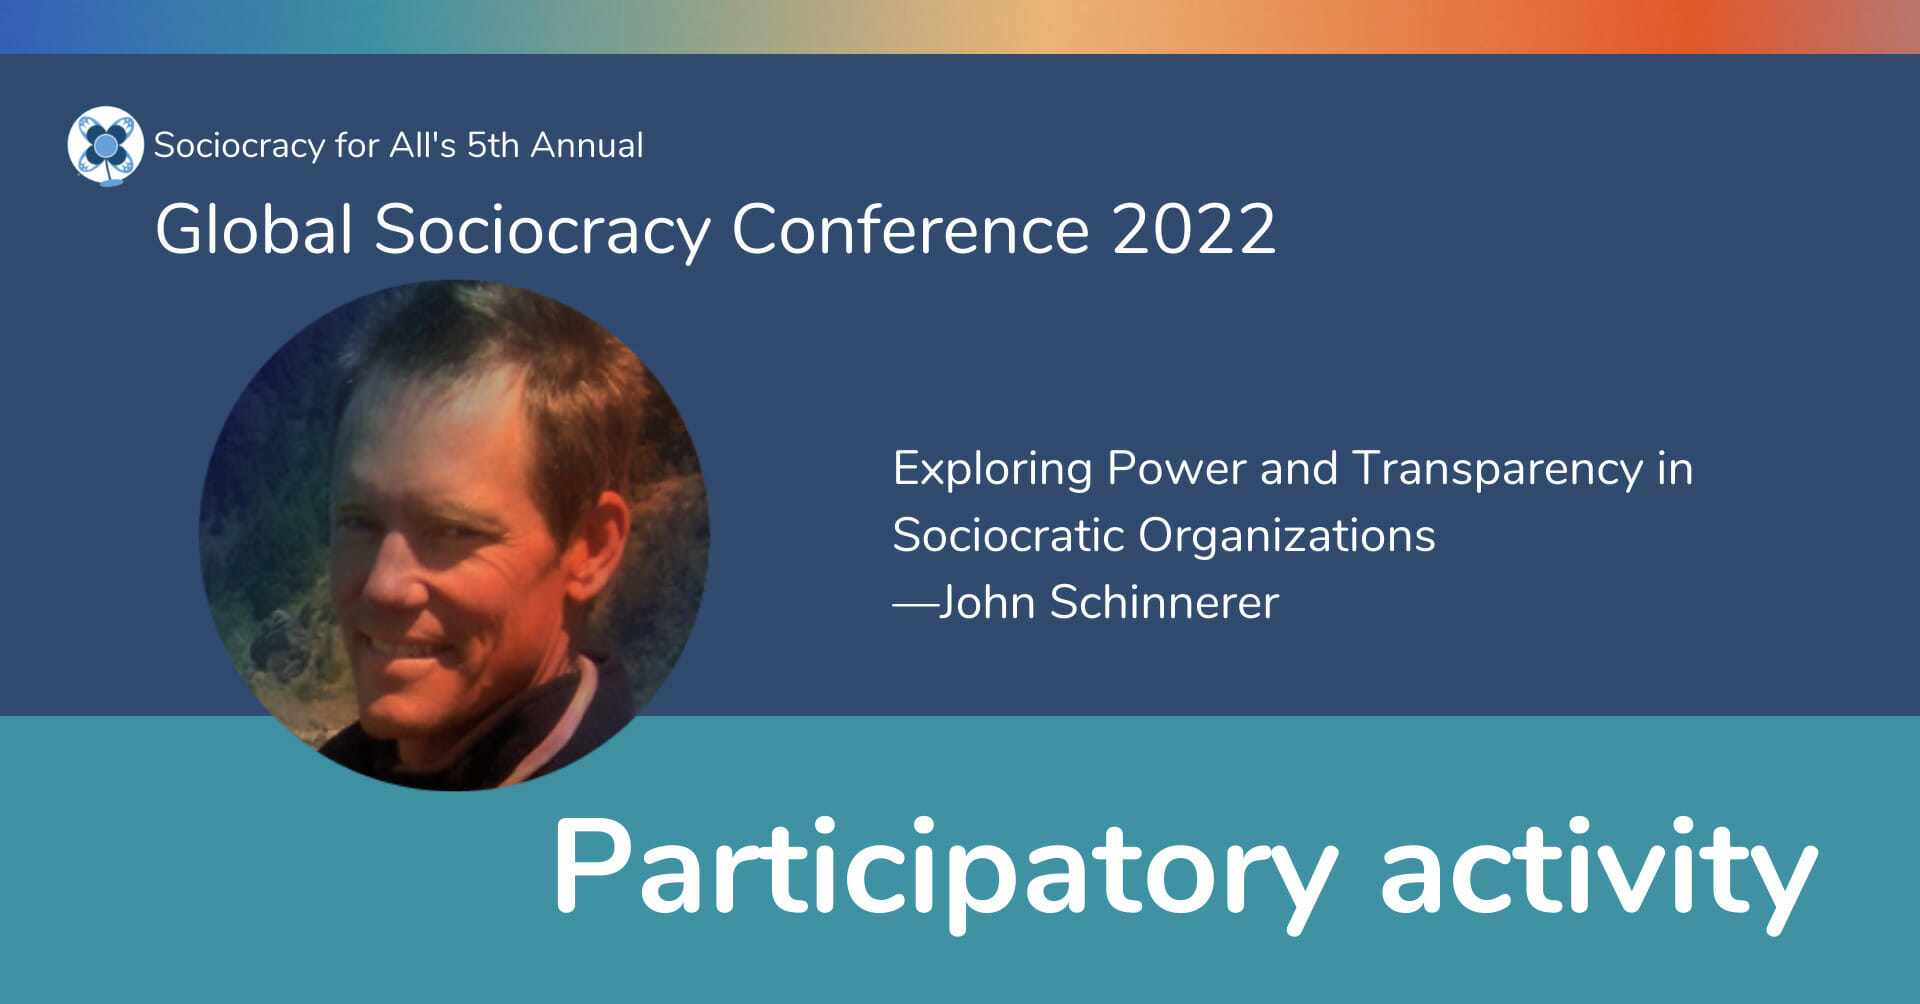 Exploring Power and Transparency in Sociocratic Organizations —John Schinnerer